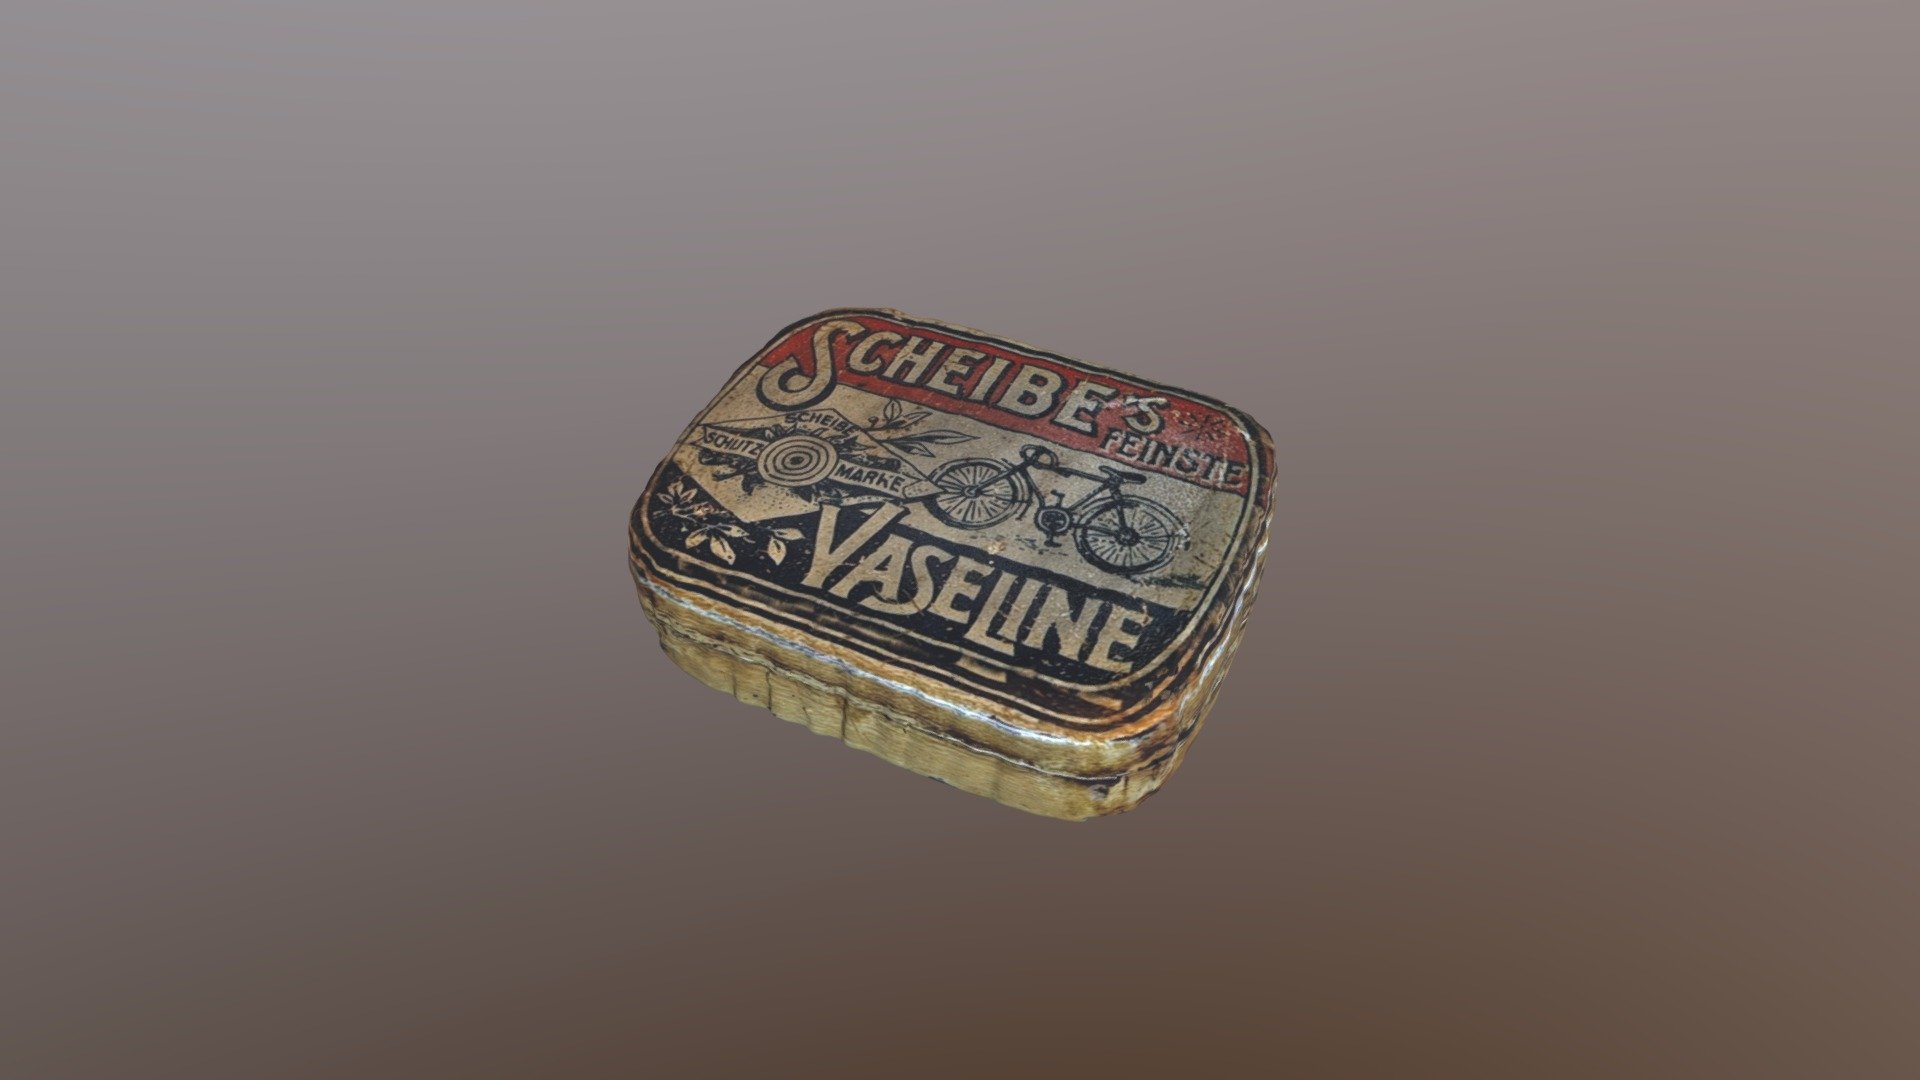 Vaseline  360scan .obj file low poly.
Ready for games, rendering, decoration.
Game ready model with super topologi 3d model